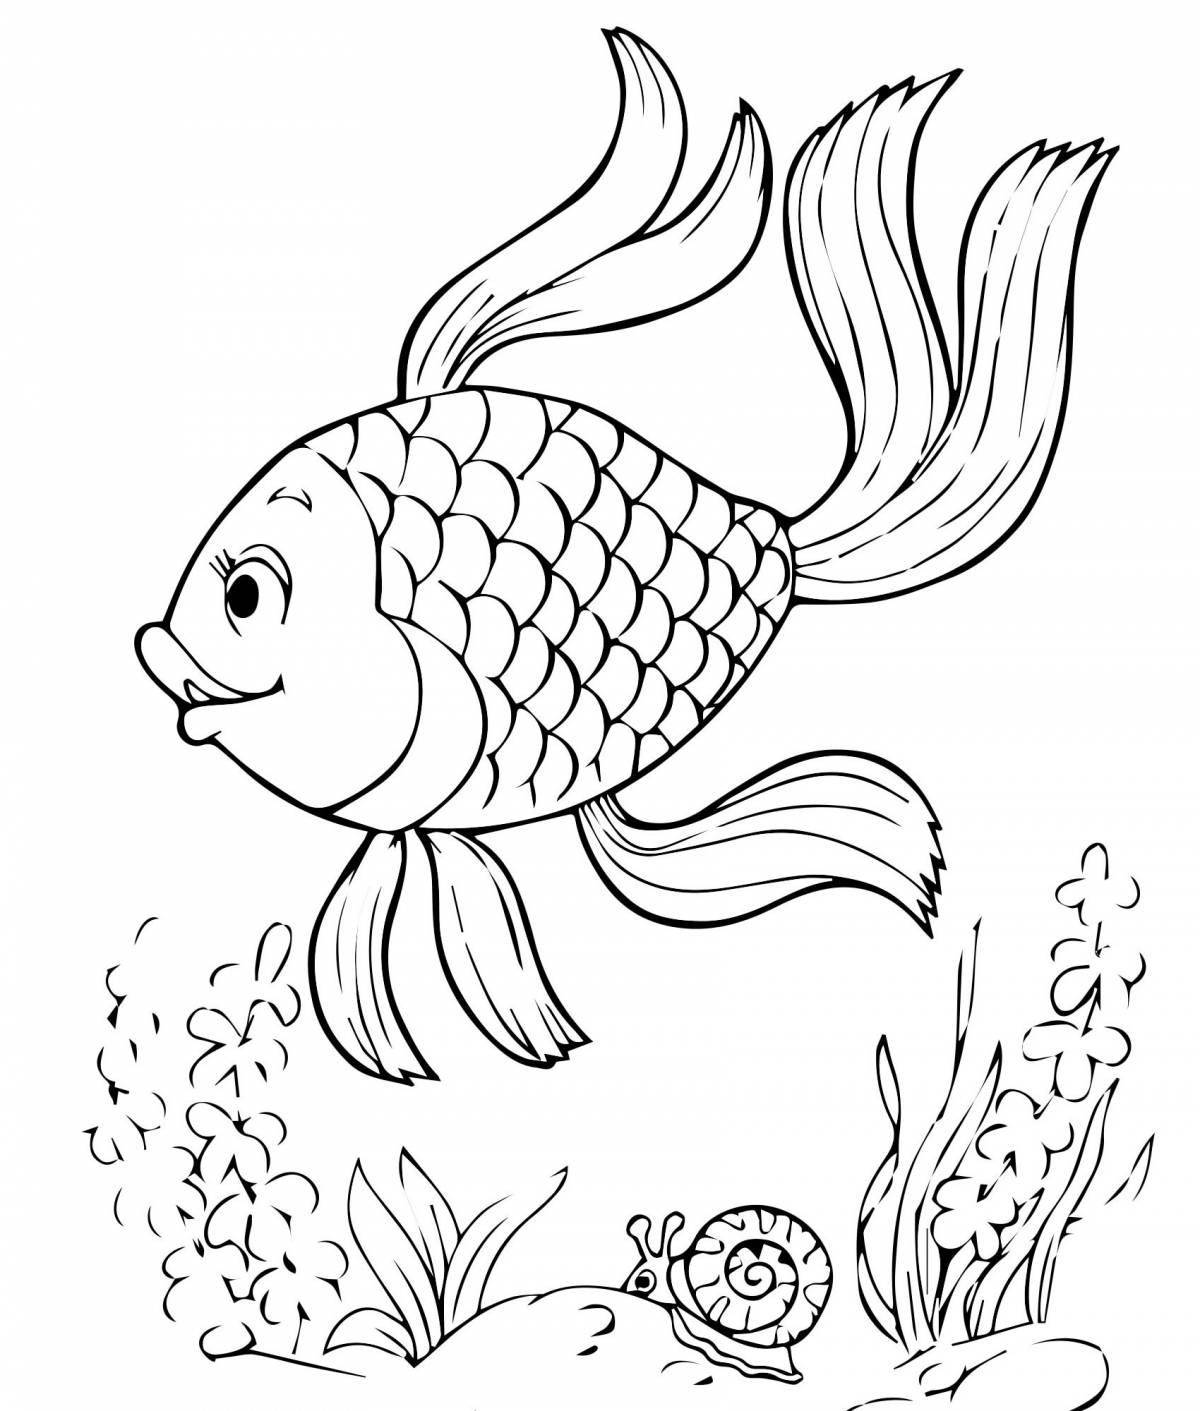 Intricate drawing of a goldfish